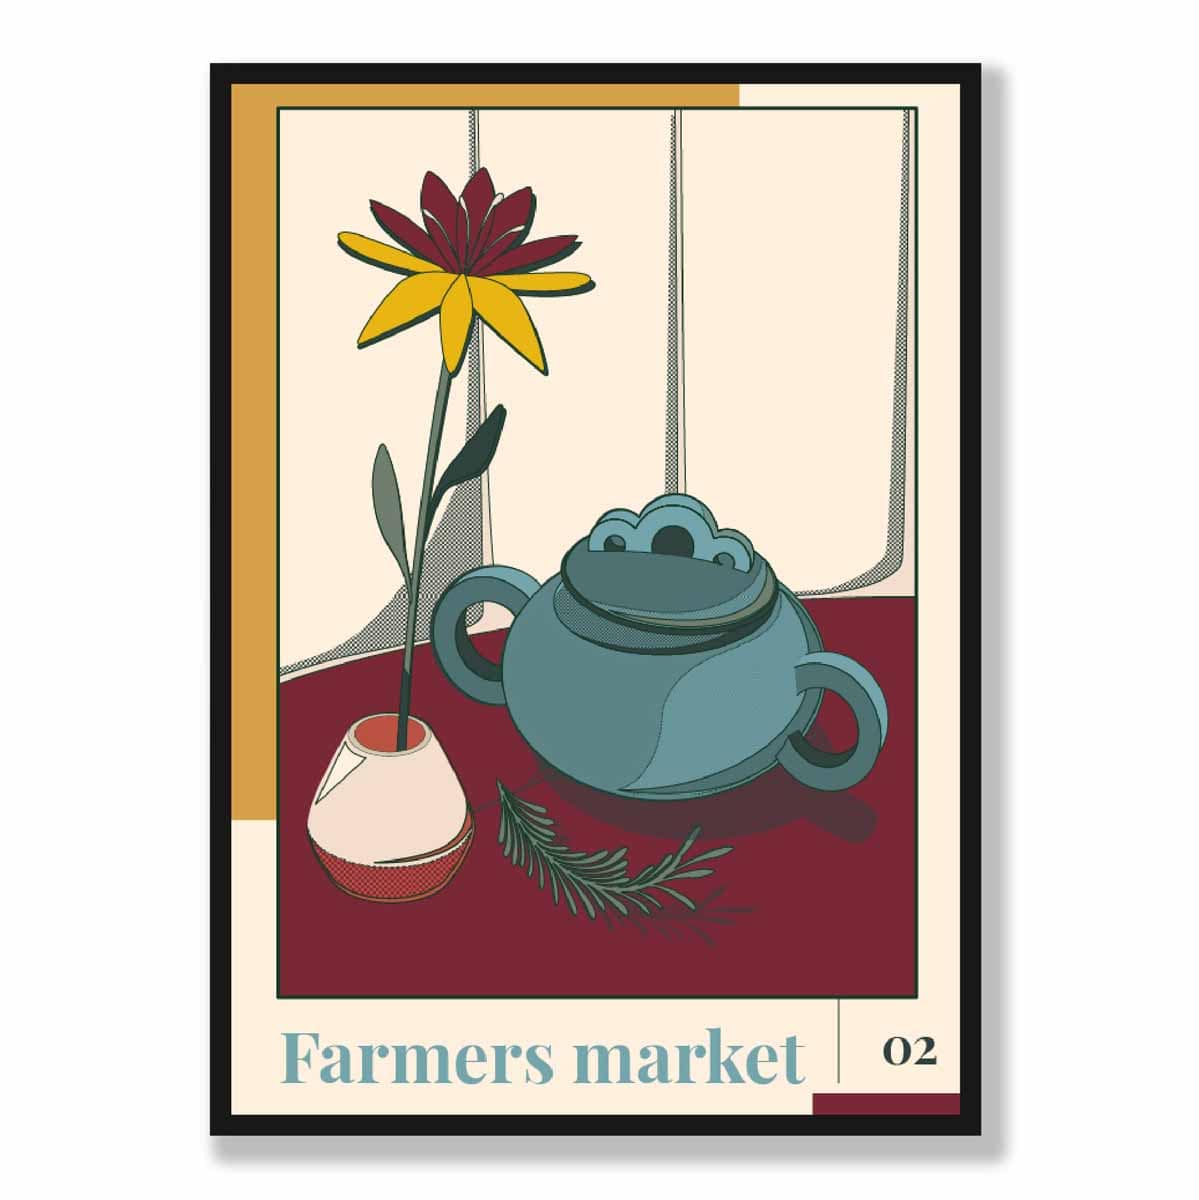 Farmers Market Poster No 2 in Damson Red and Blue